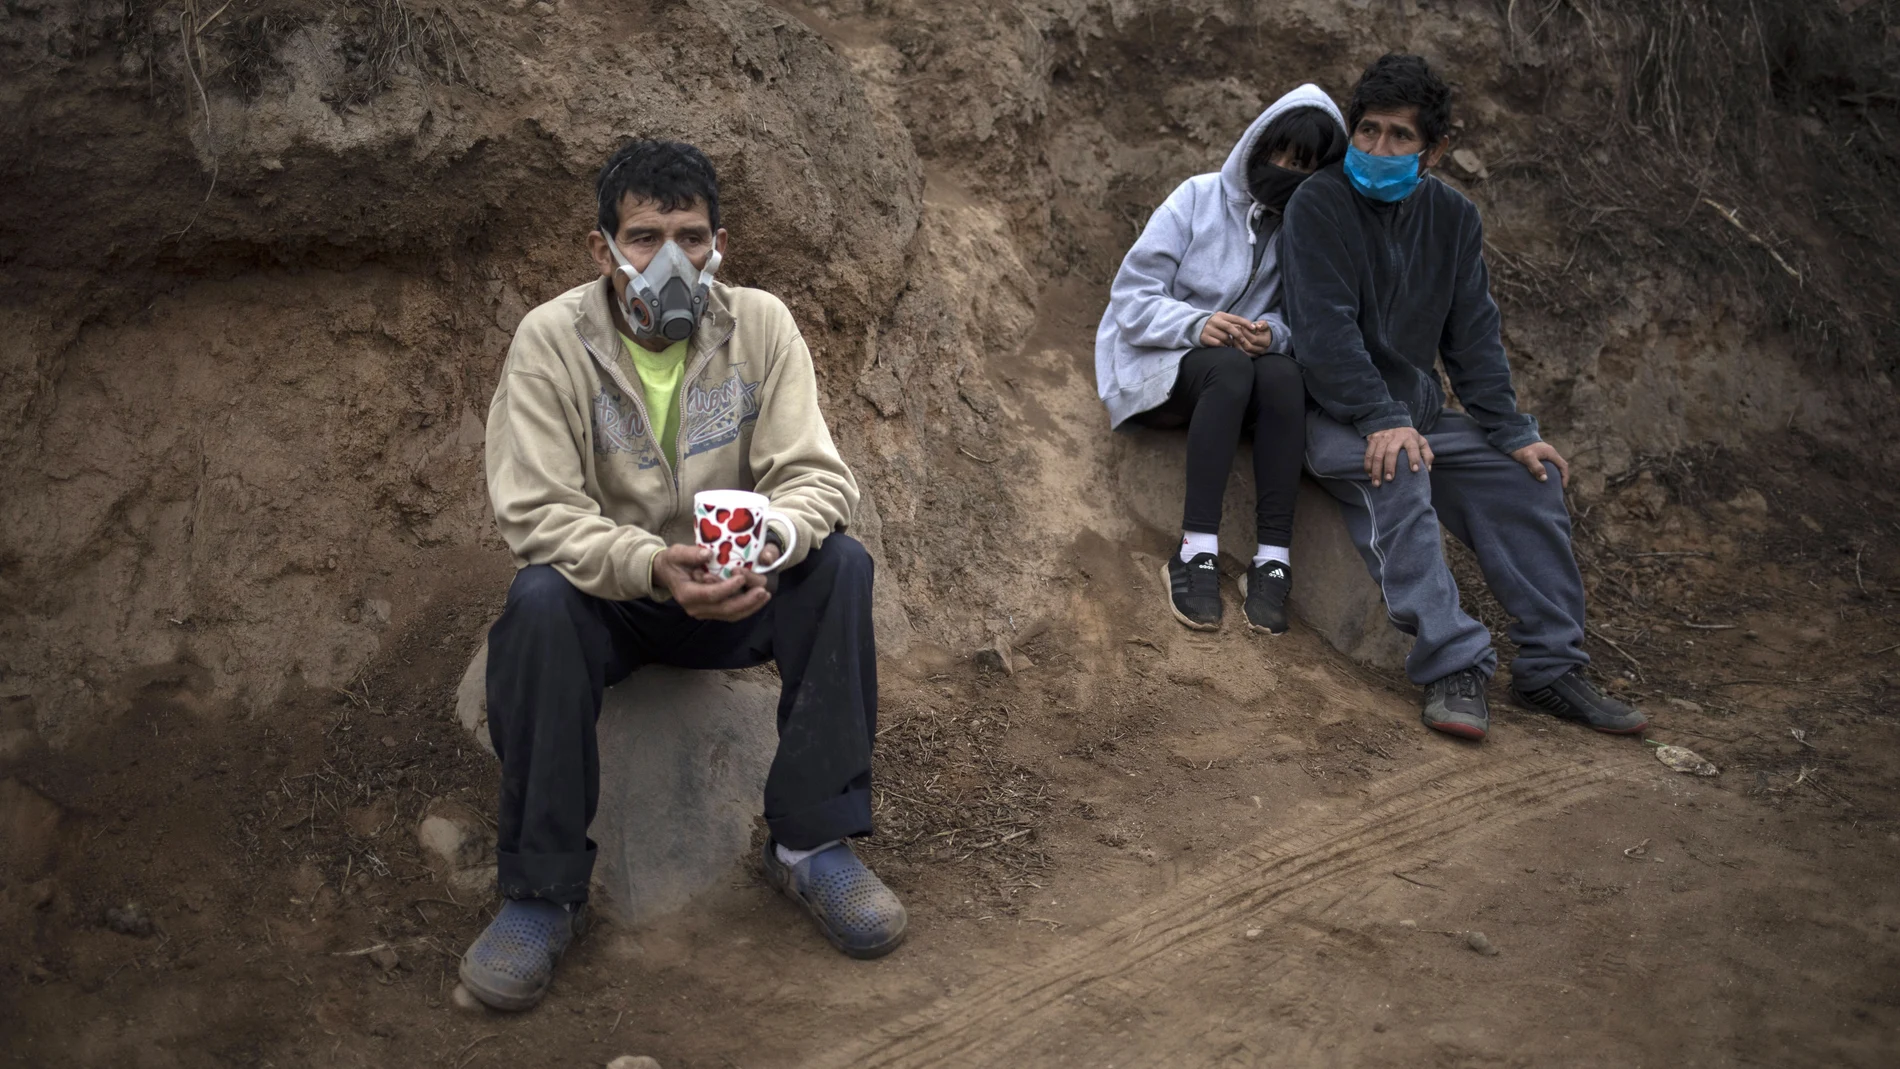 Angel Aguero, left, wearing a mask to curb the spread of the new coronavirus, waits to refill his cup with quinoa donated by a family at the Villa Maria del Triunfo district of Lima, Peru, Wednesday, June 17, 2020. The food was donated by a wealthy family and distributed in a poverty-stricken area of the capital. (AP Photo/Rodrigo Abd)